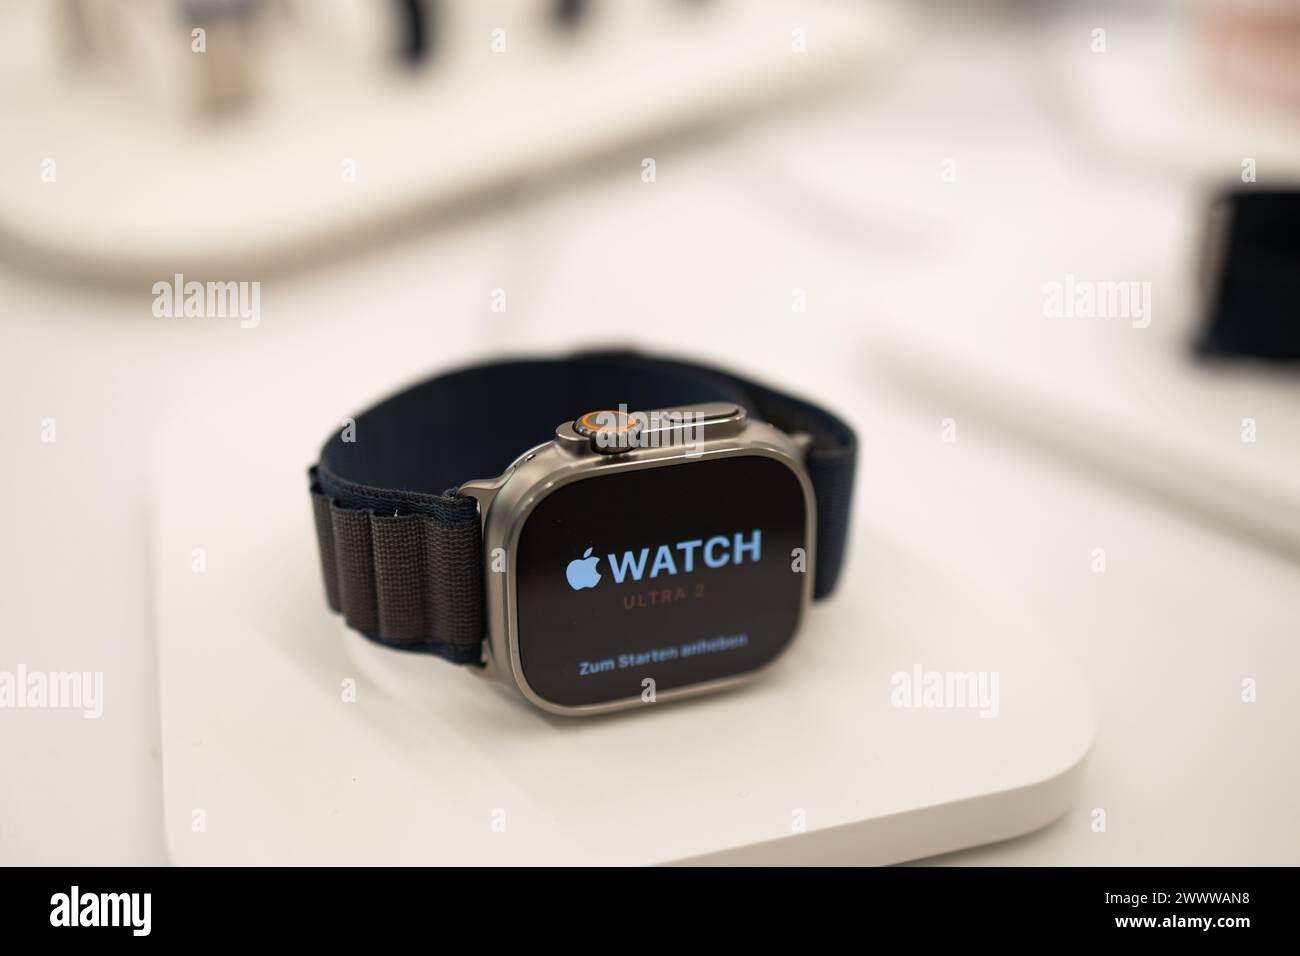 A closeup shot of an Apple Watch Ultra on display at a store Stock Photo